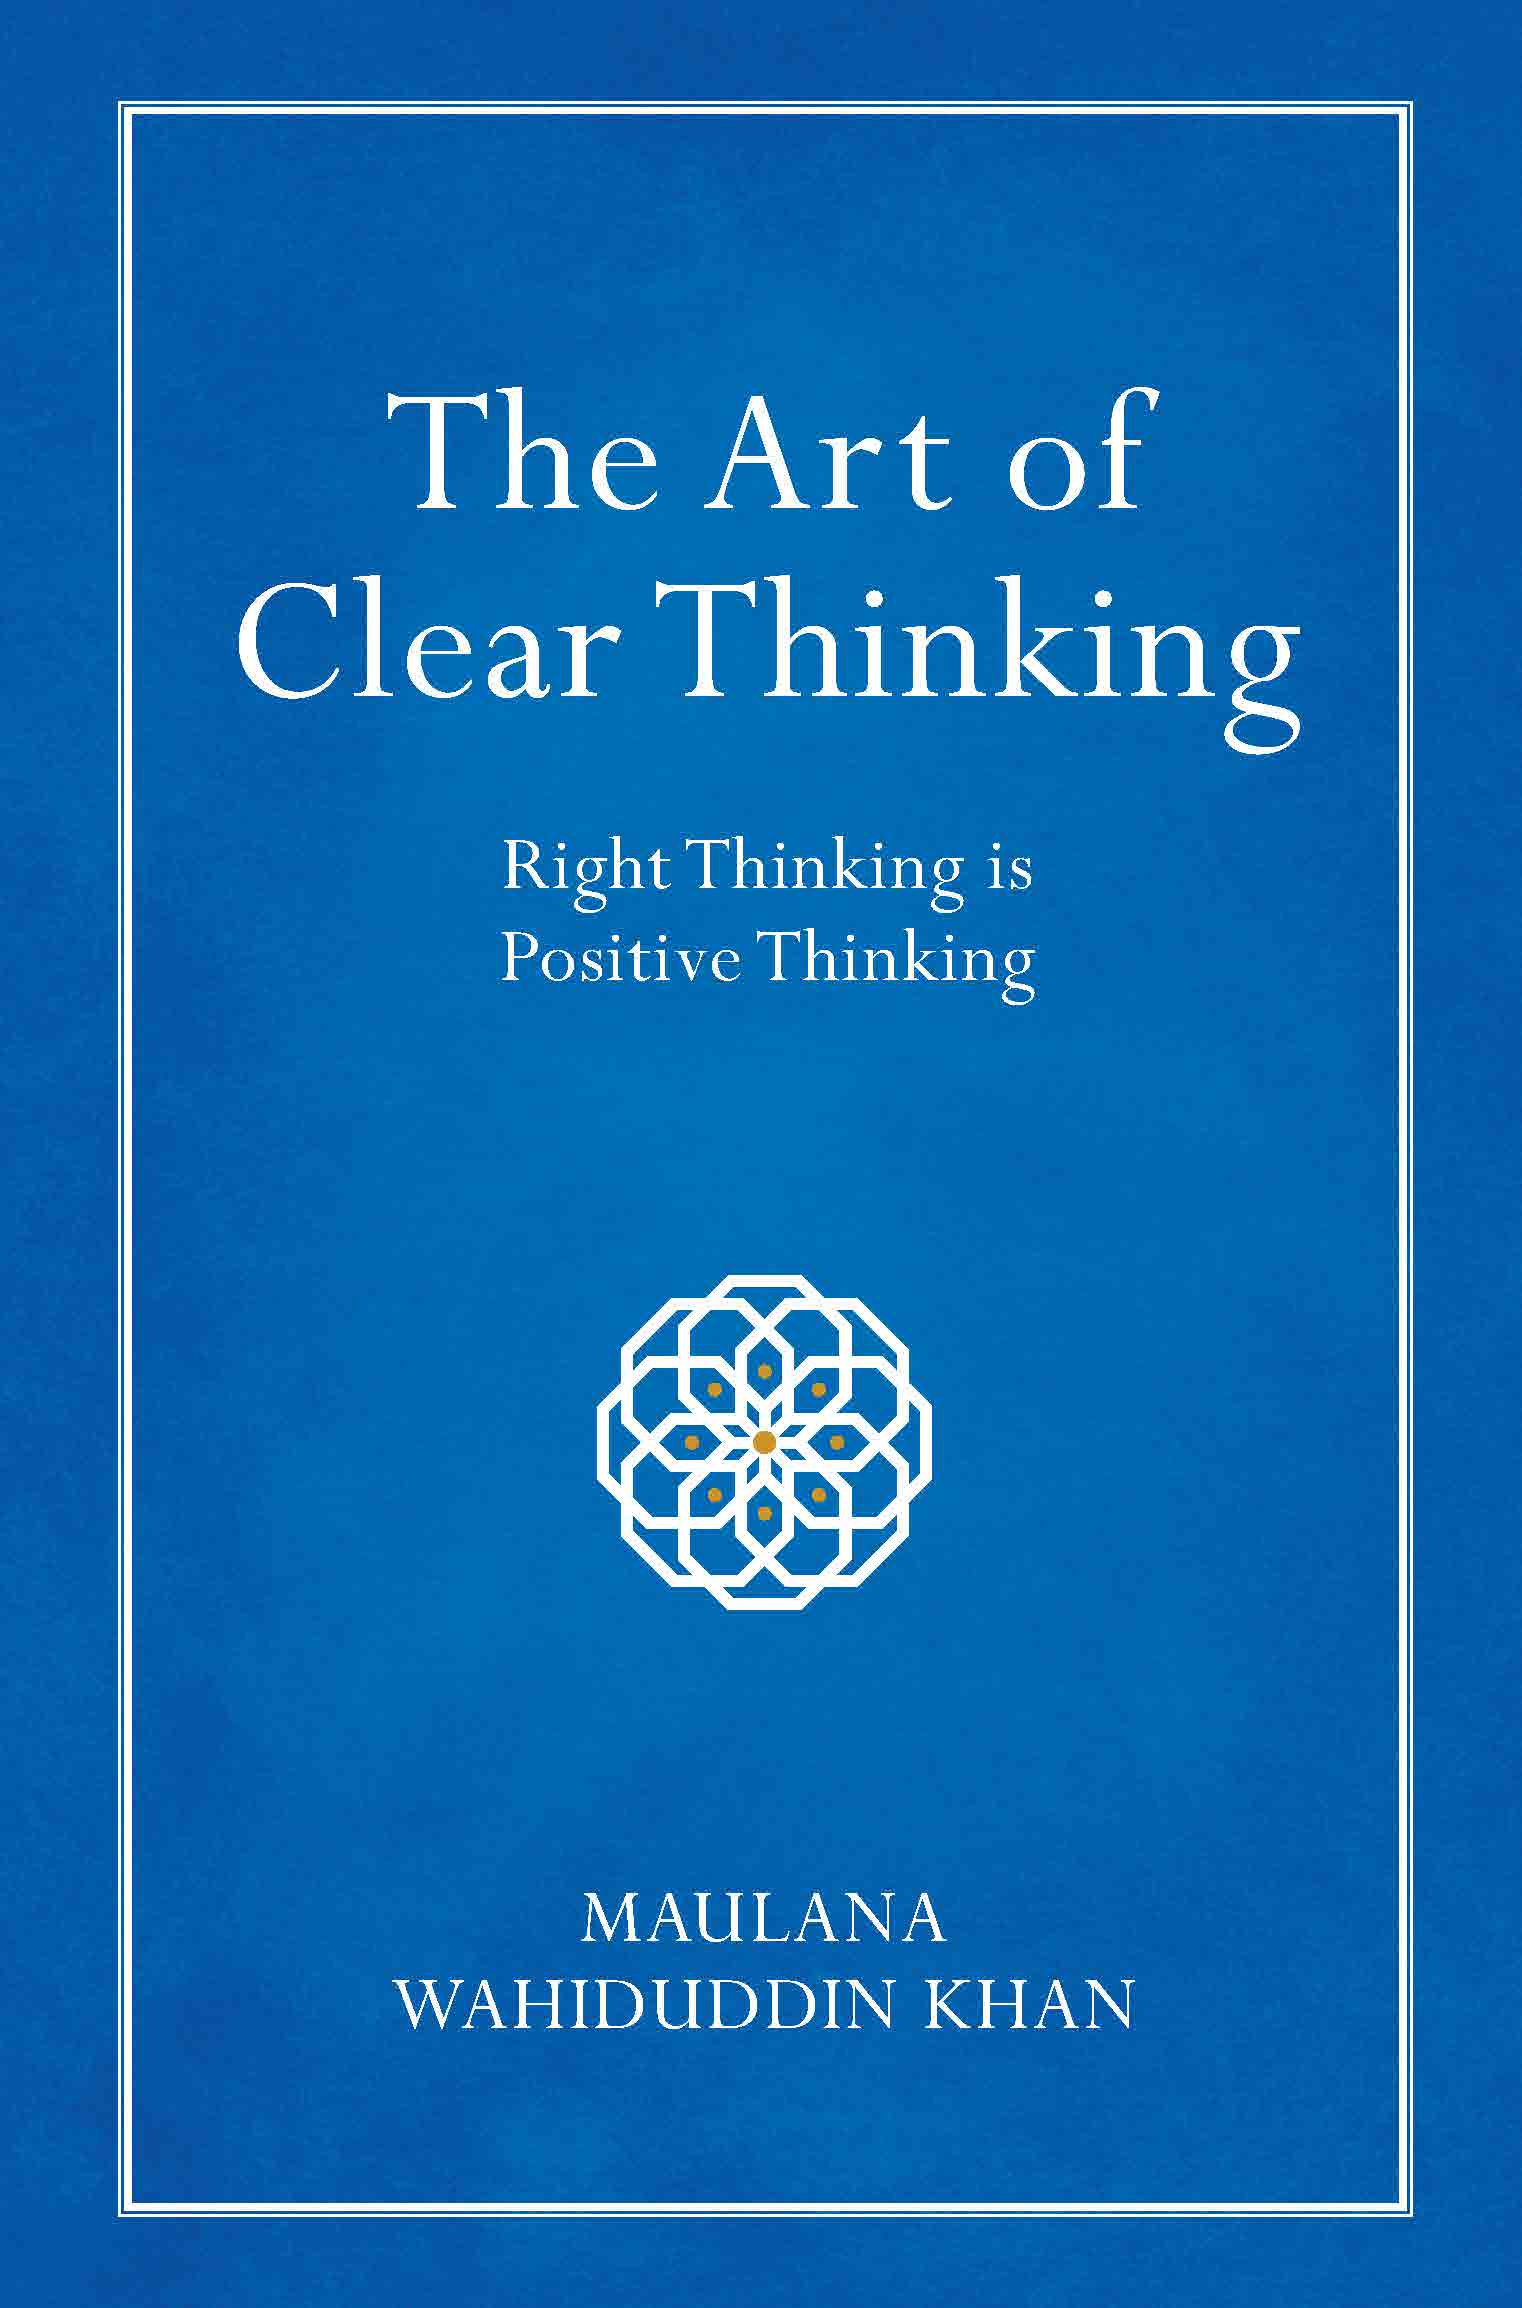 THE ART OF CLEAR THINKING COVER PAGE